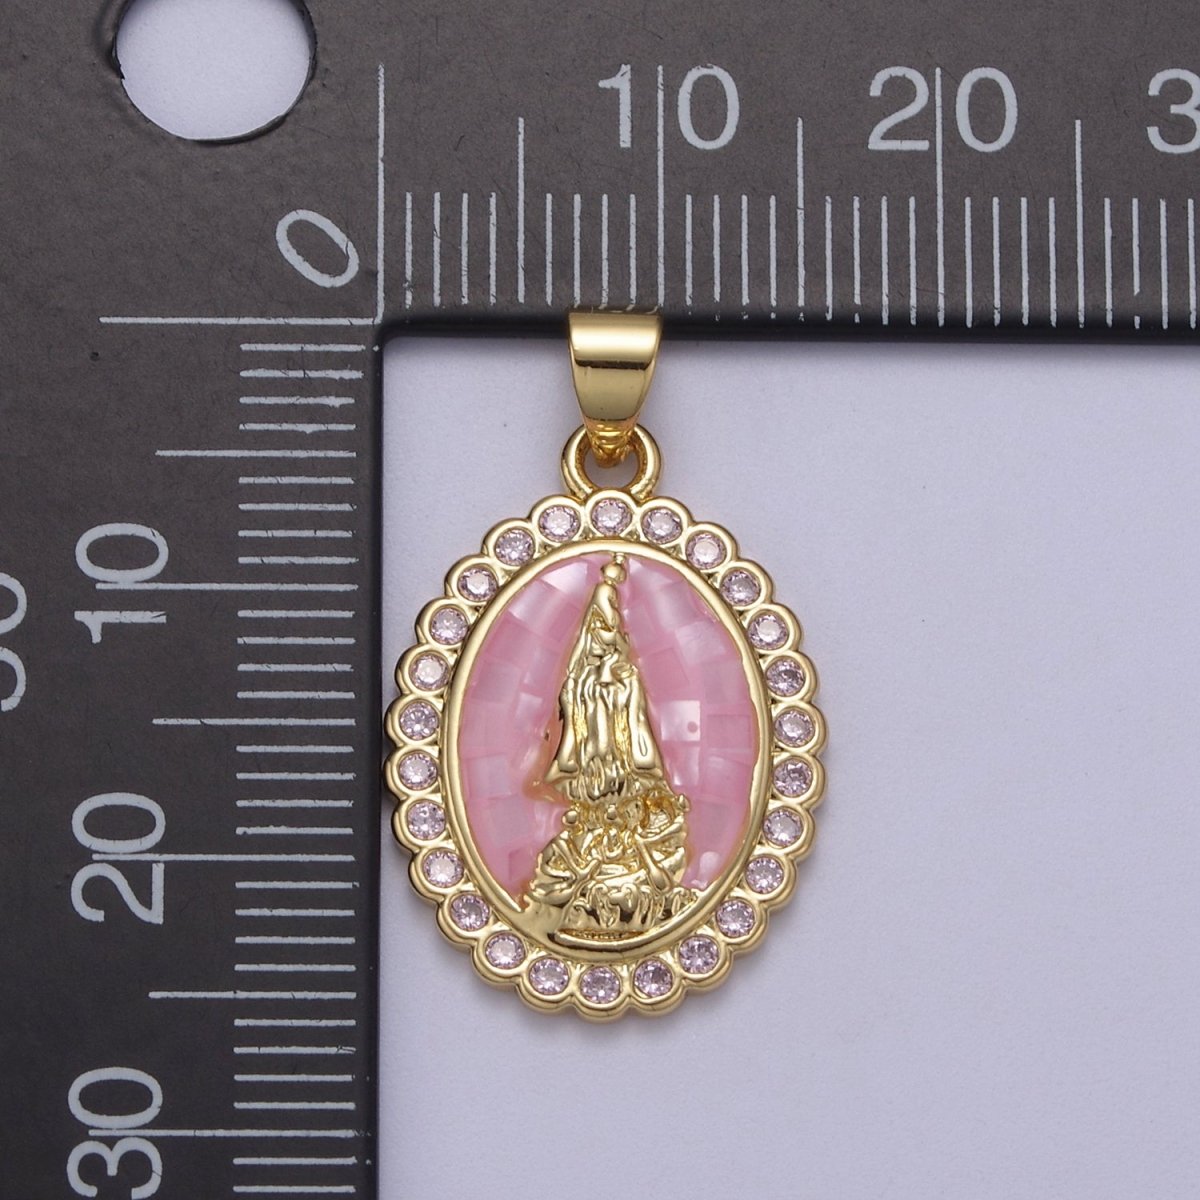 Pink Opal Miraculous Lady Charm for Necklace, Dainty Lady of Guadalupe Pendant for Religious Jewelry Making Supply in Gold Filled H-601 - DLUXCA